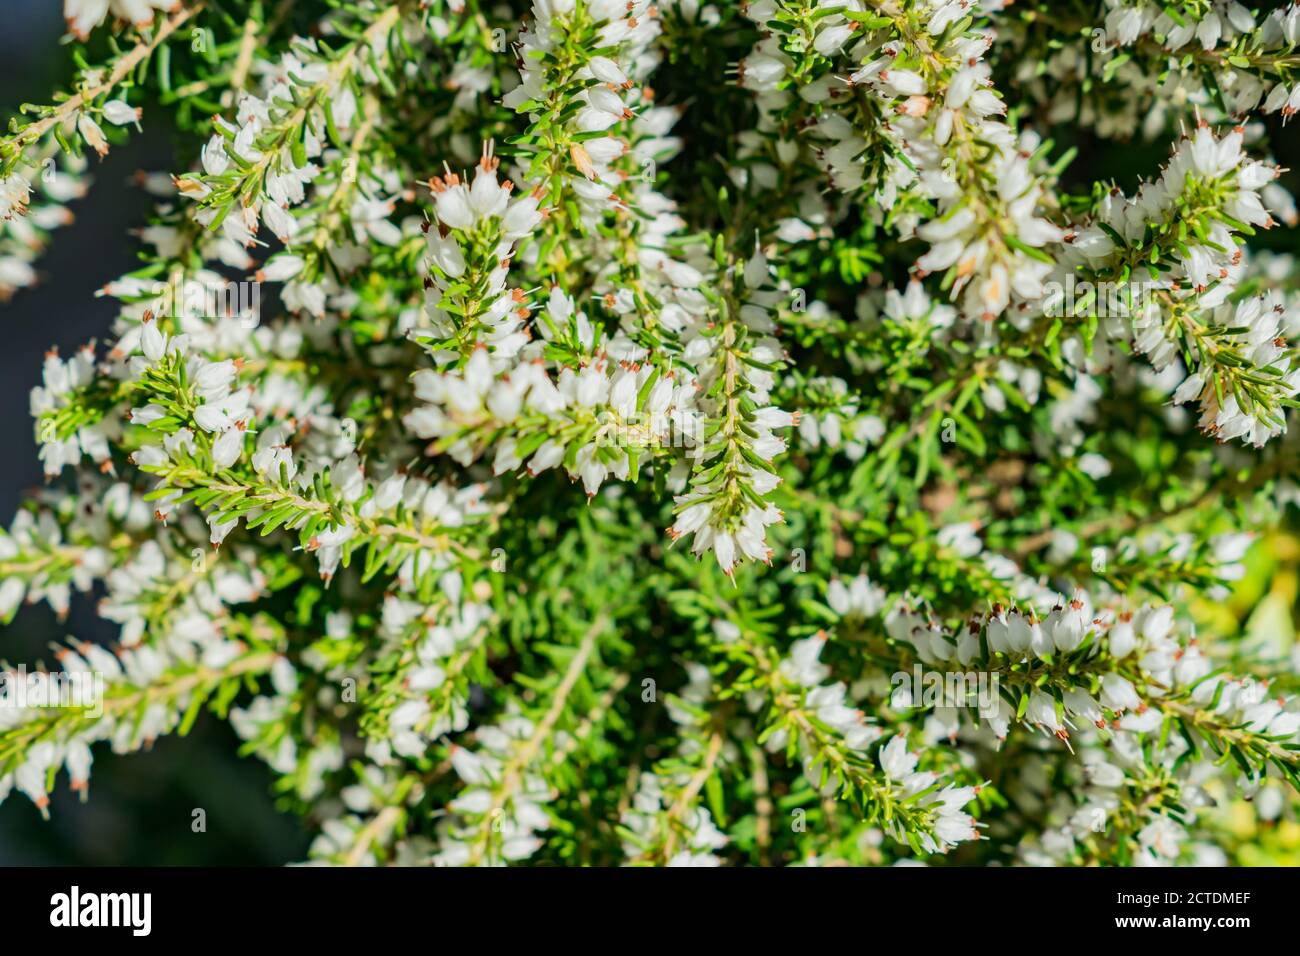 Erica darleyensis - one of the first spring plants. White heather flowers backgrpund Stock Photo